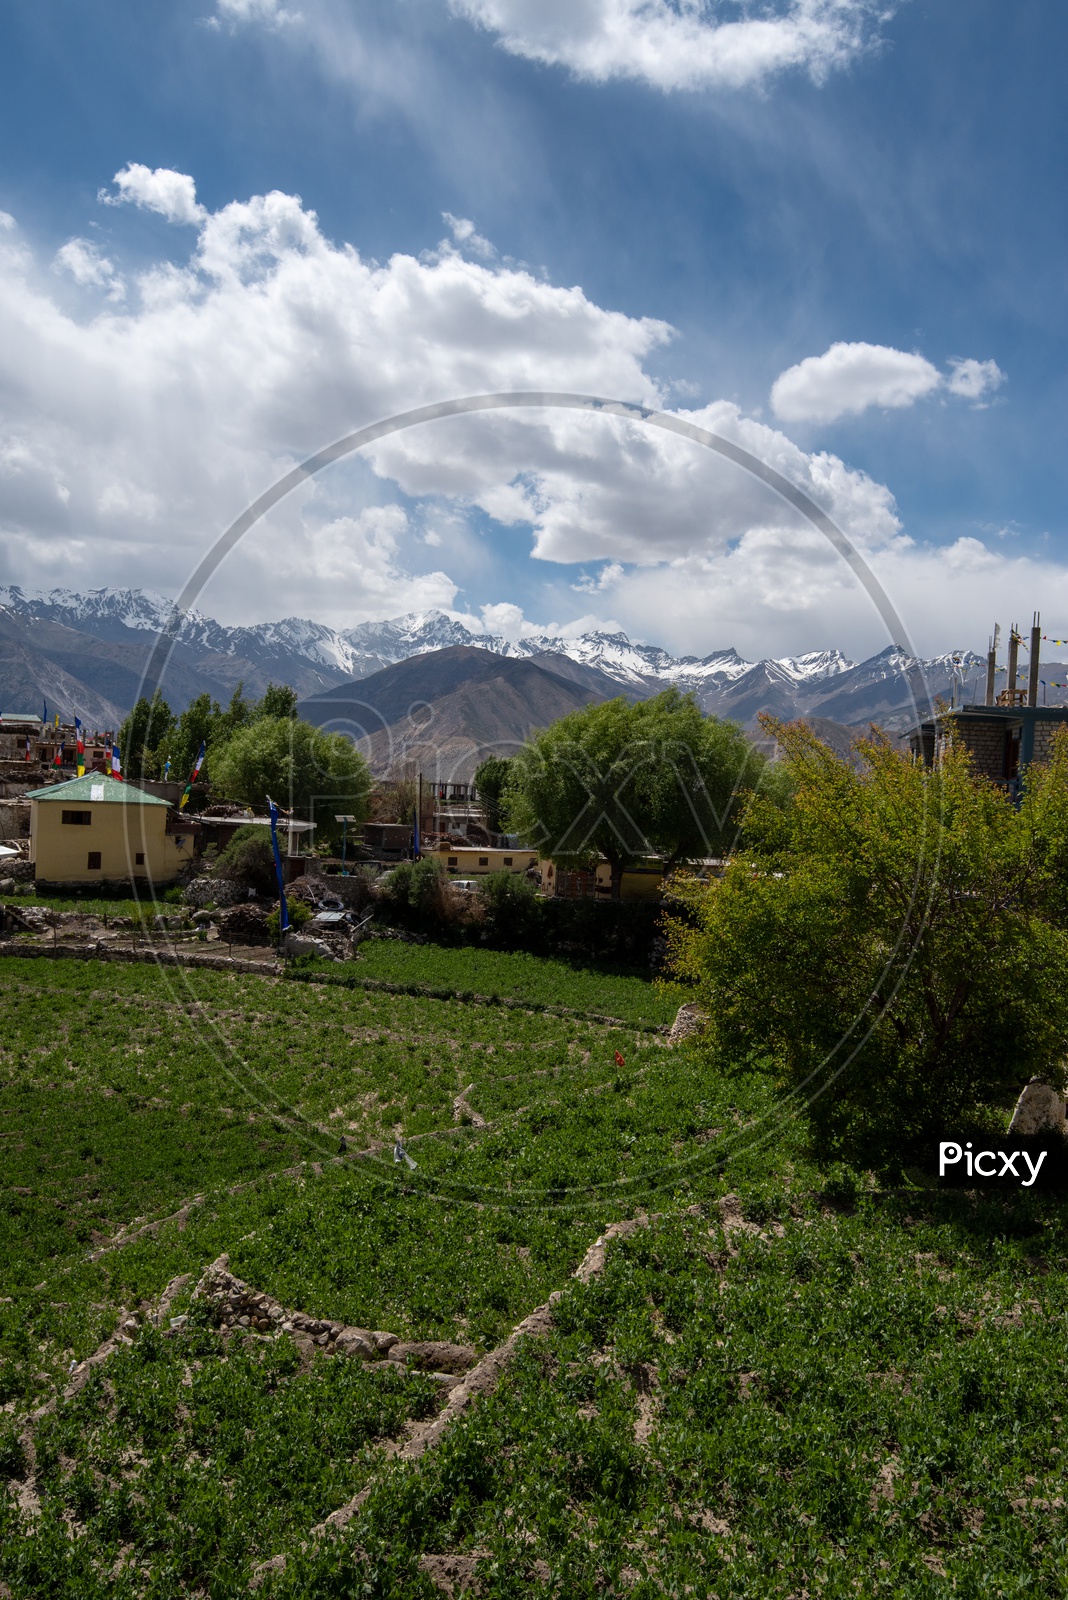 Snow Capped Mountains of Spiti Valley with agriculture fields and houses